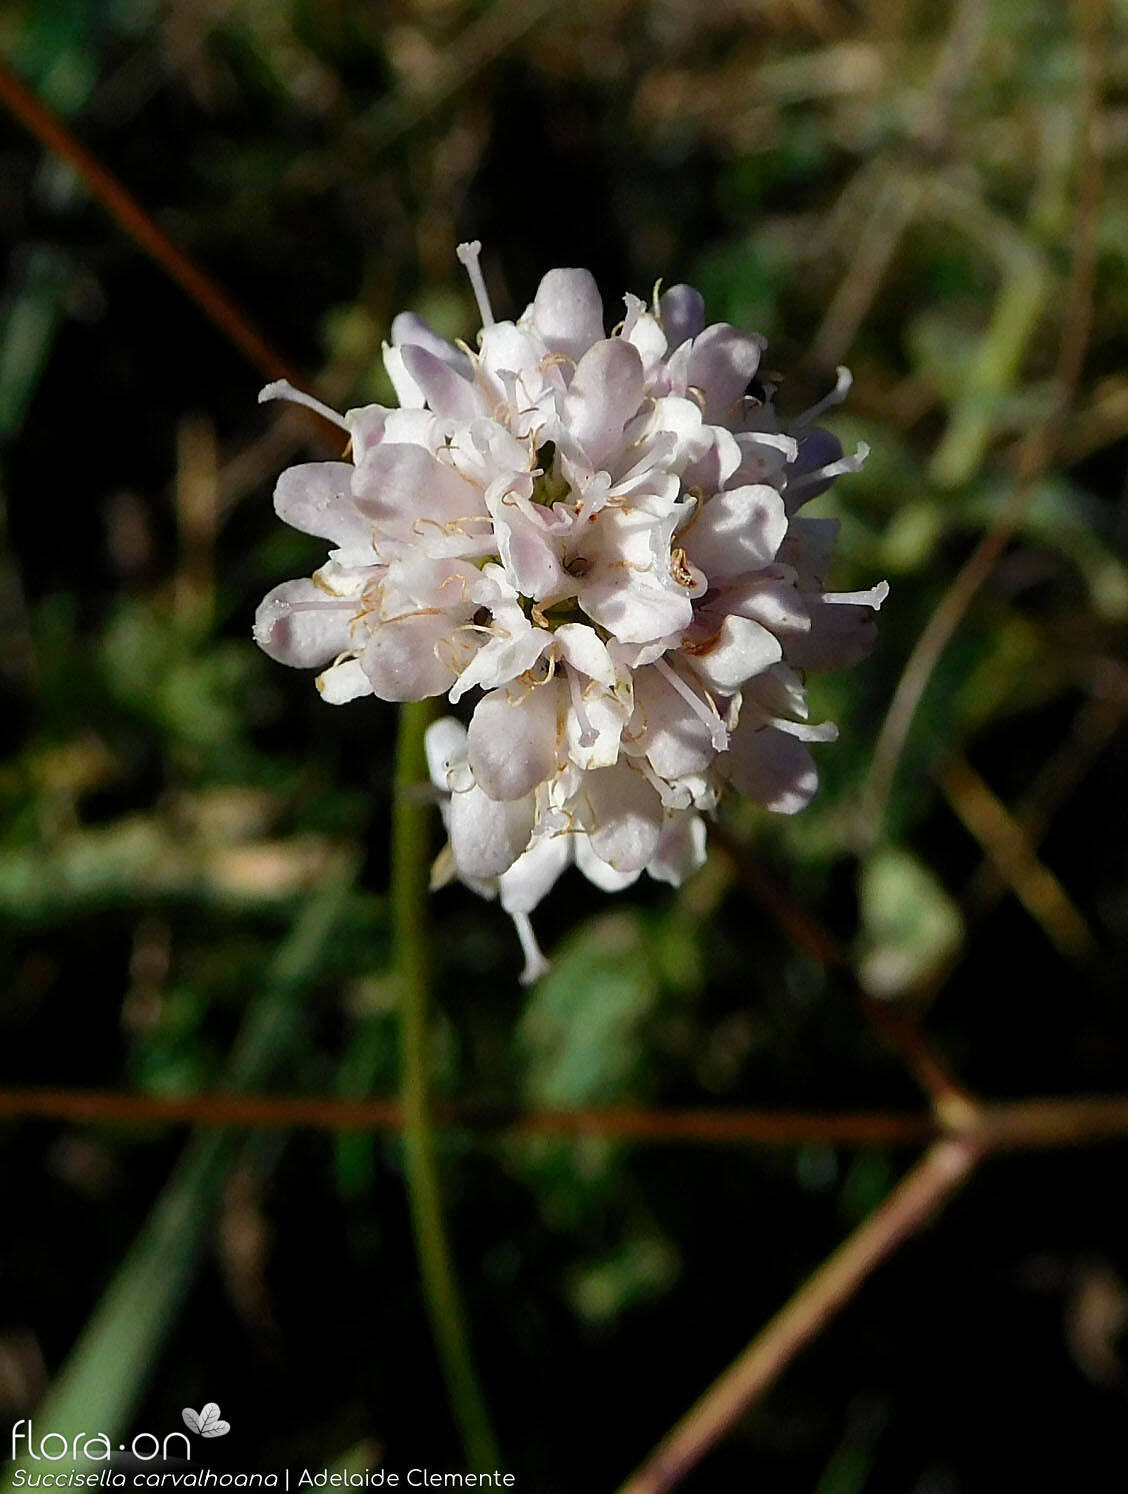 Succisella carvalhoana - Flor (close-up) | Adelaide Clemente; CC BY-NC 4.0